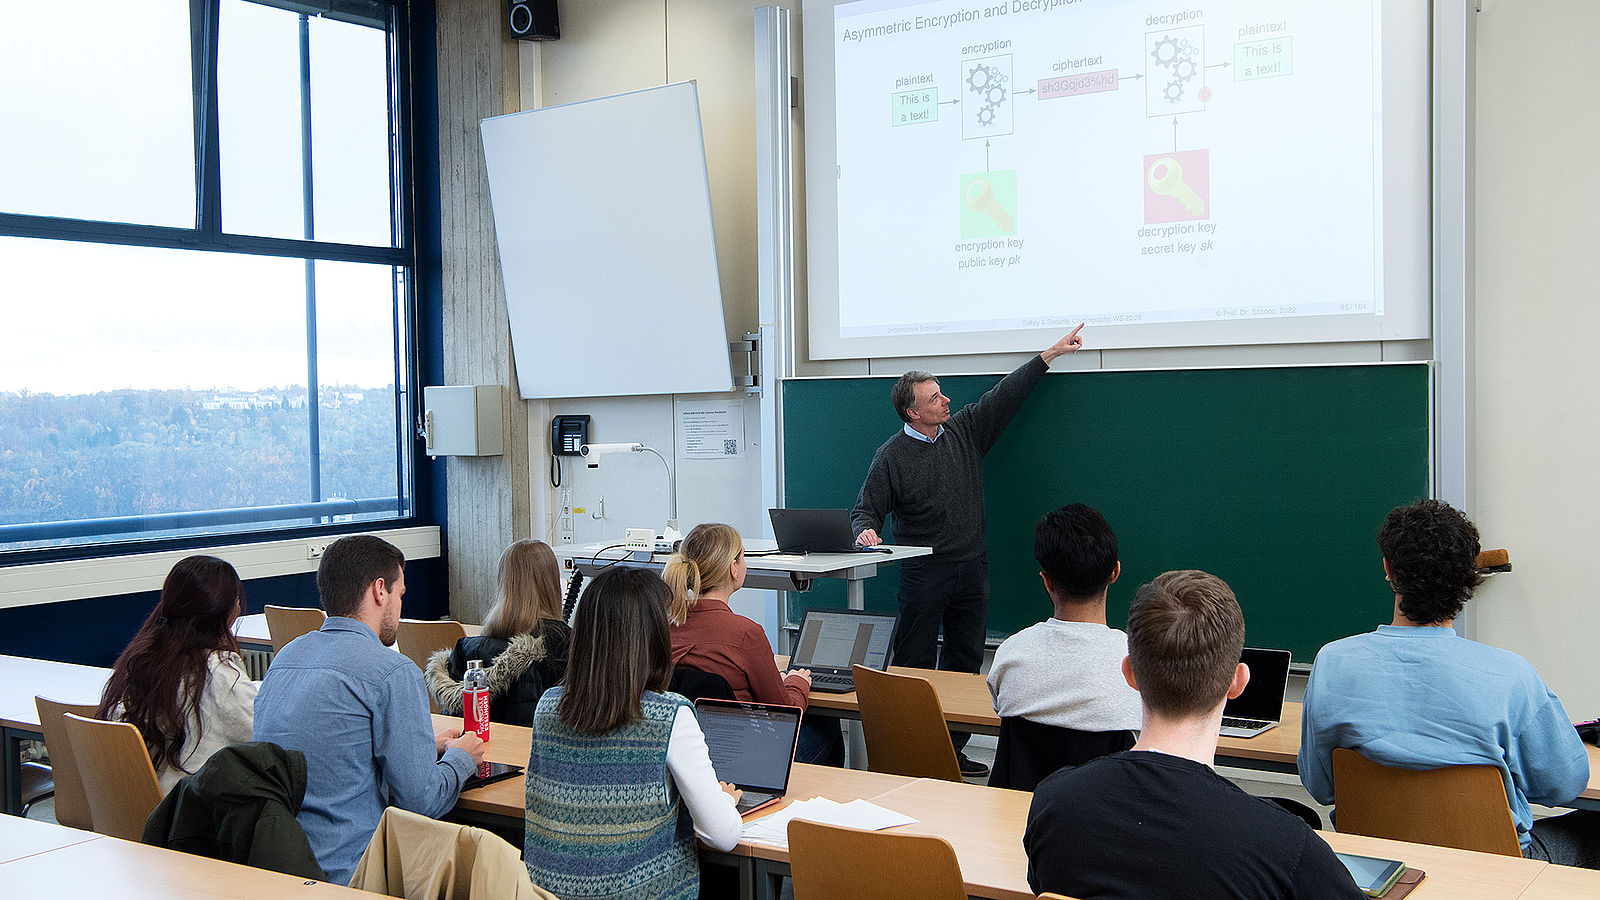 What is behind IT Security? In the lectures, students receive a sound fundamental education.